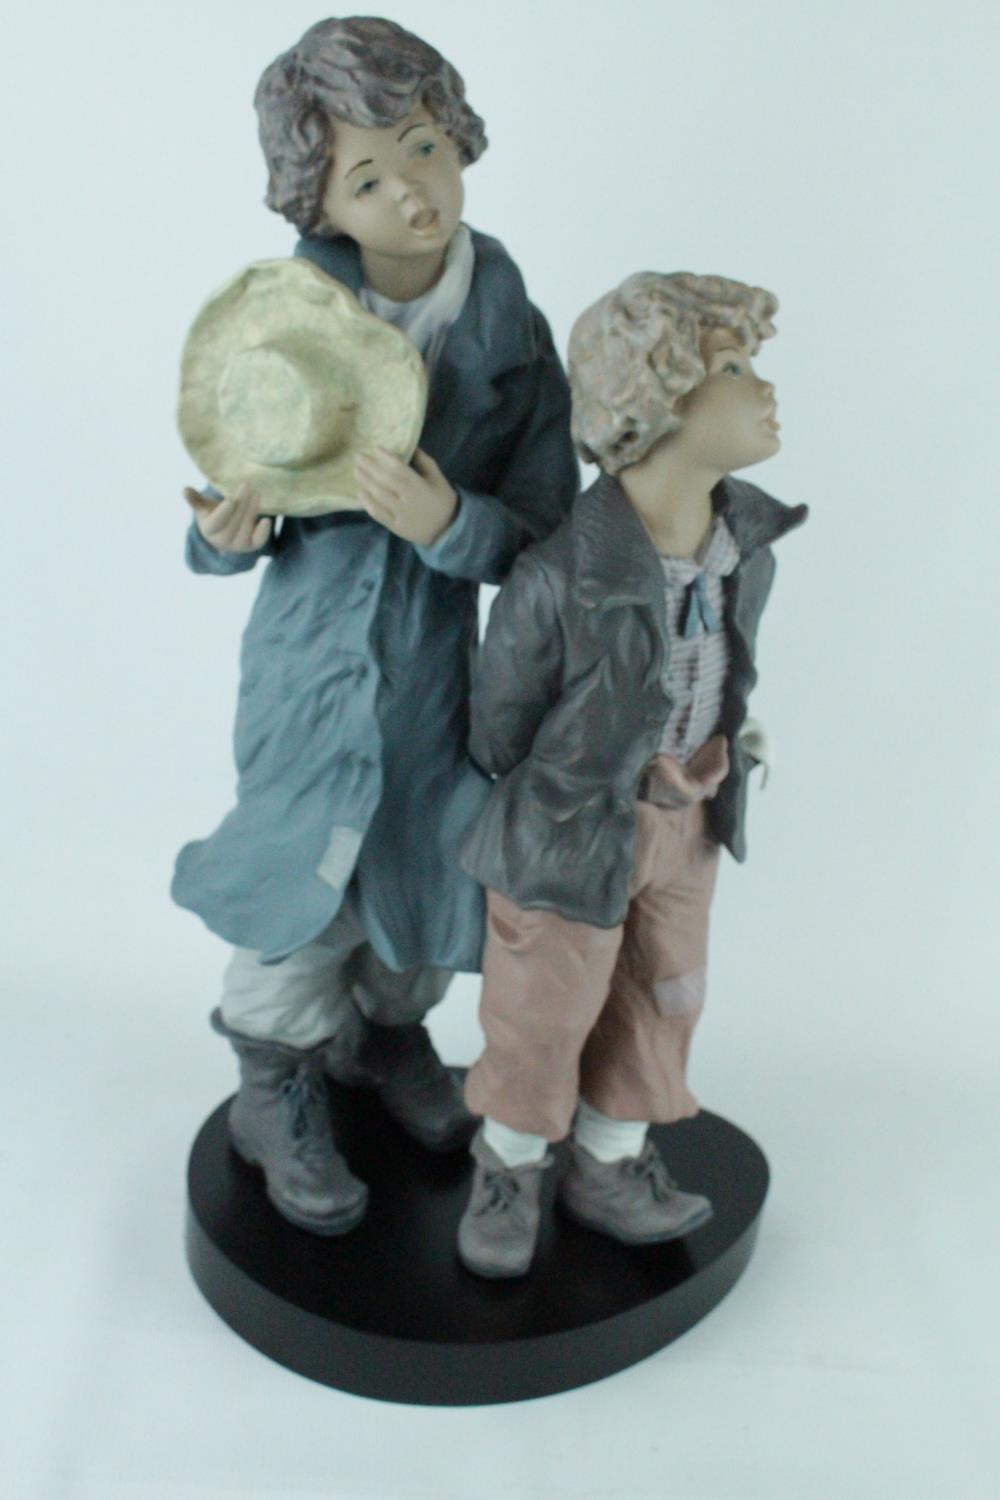 Signed Lladro Goyesca 'Hes my Brother', Limited Edition 261 of 350, Sculptor: Enrique Sanisidro.